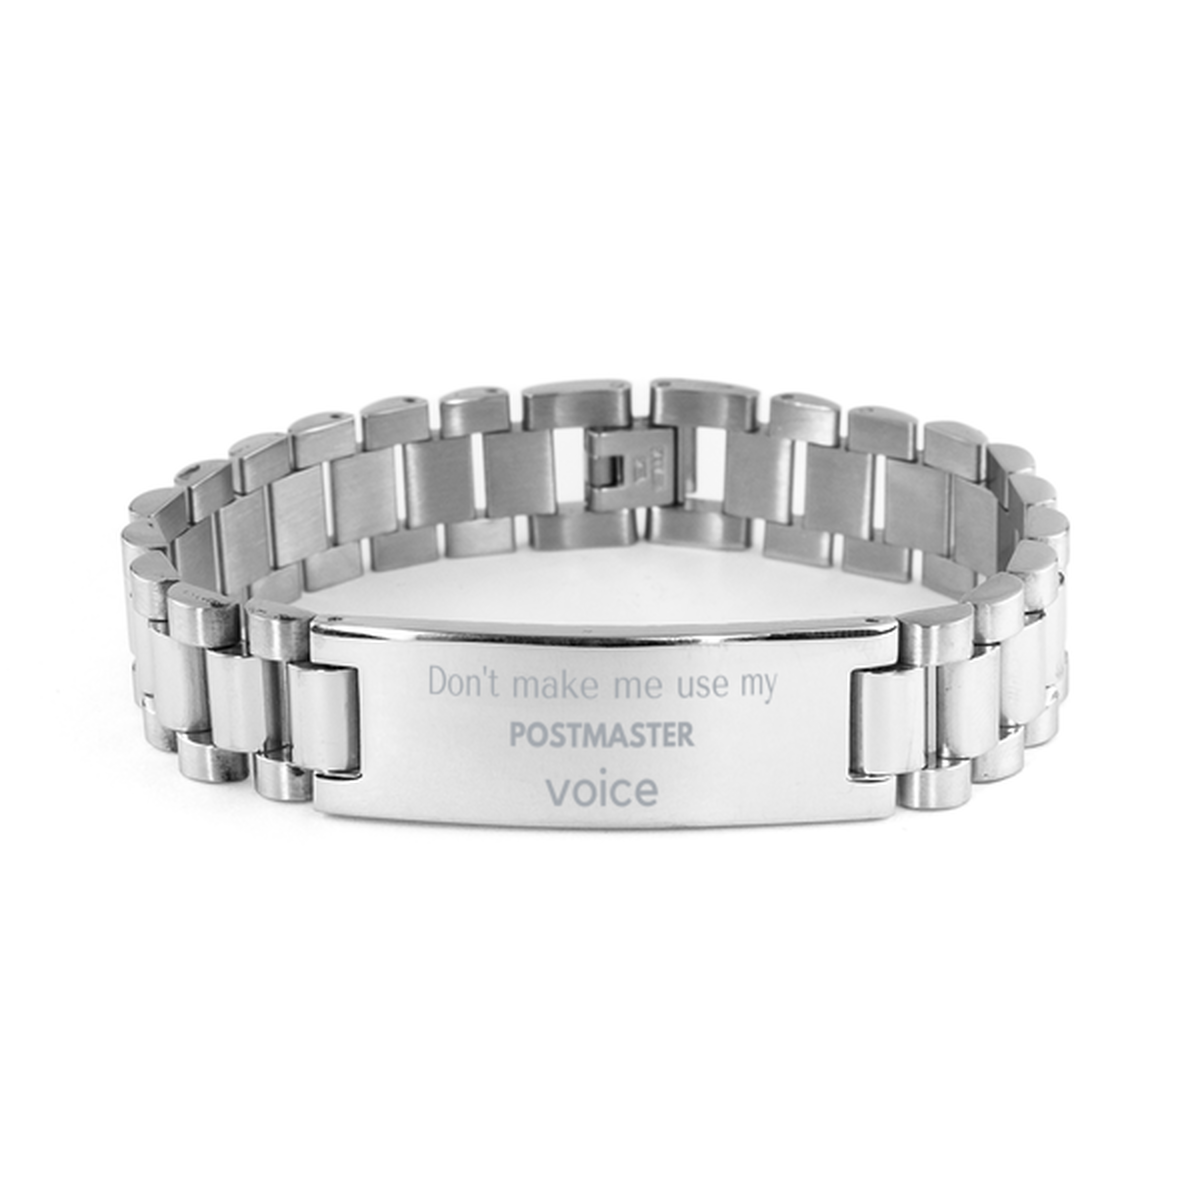 Don't make me use my Postmaster voice, Sarcasm Postmaster Gifts, Christmas Postmaster Ladder Stainless Steel Bracelet Birthday Unique Gifts For Postmaster Coworkers, Men, Women, Colleague, Friends